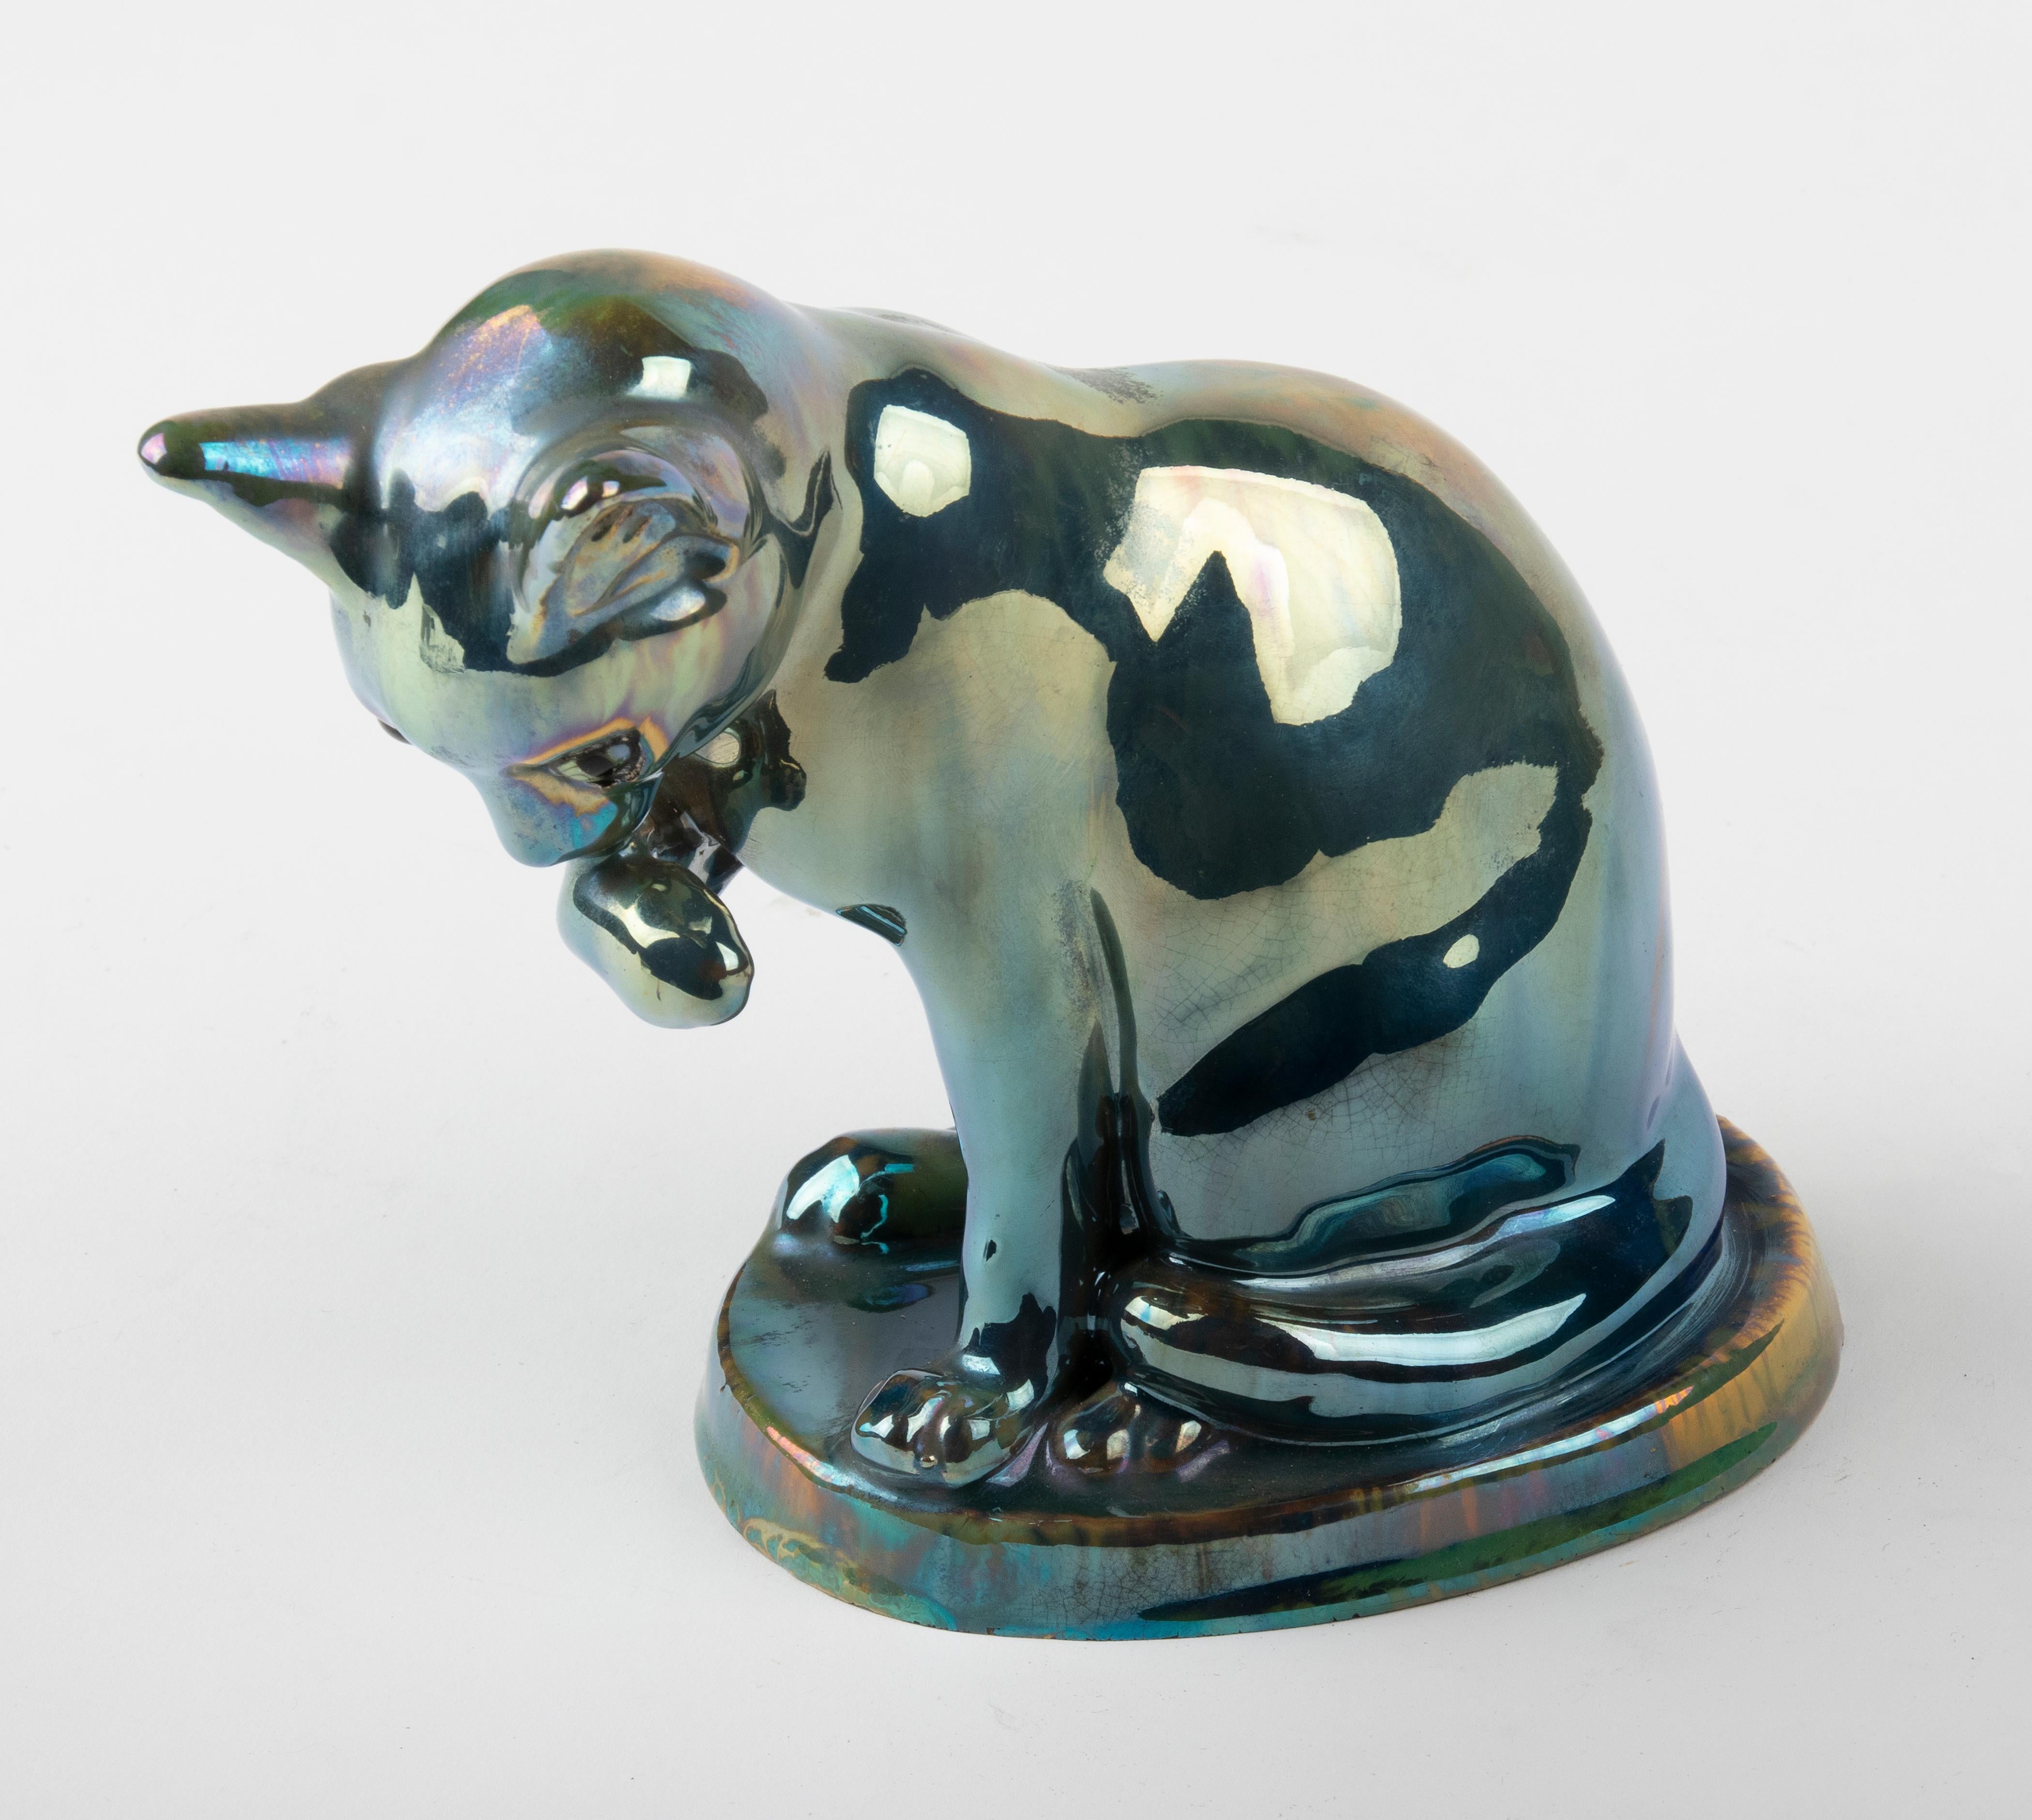 1930's Ceramic Cat Figure with Iridescent Glaze, Alph. Cytère Rambervilliers For Sale 1